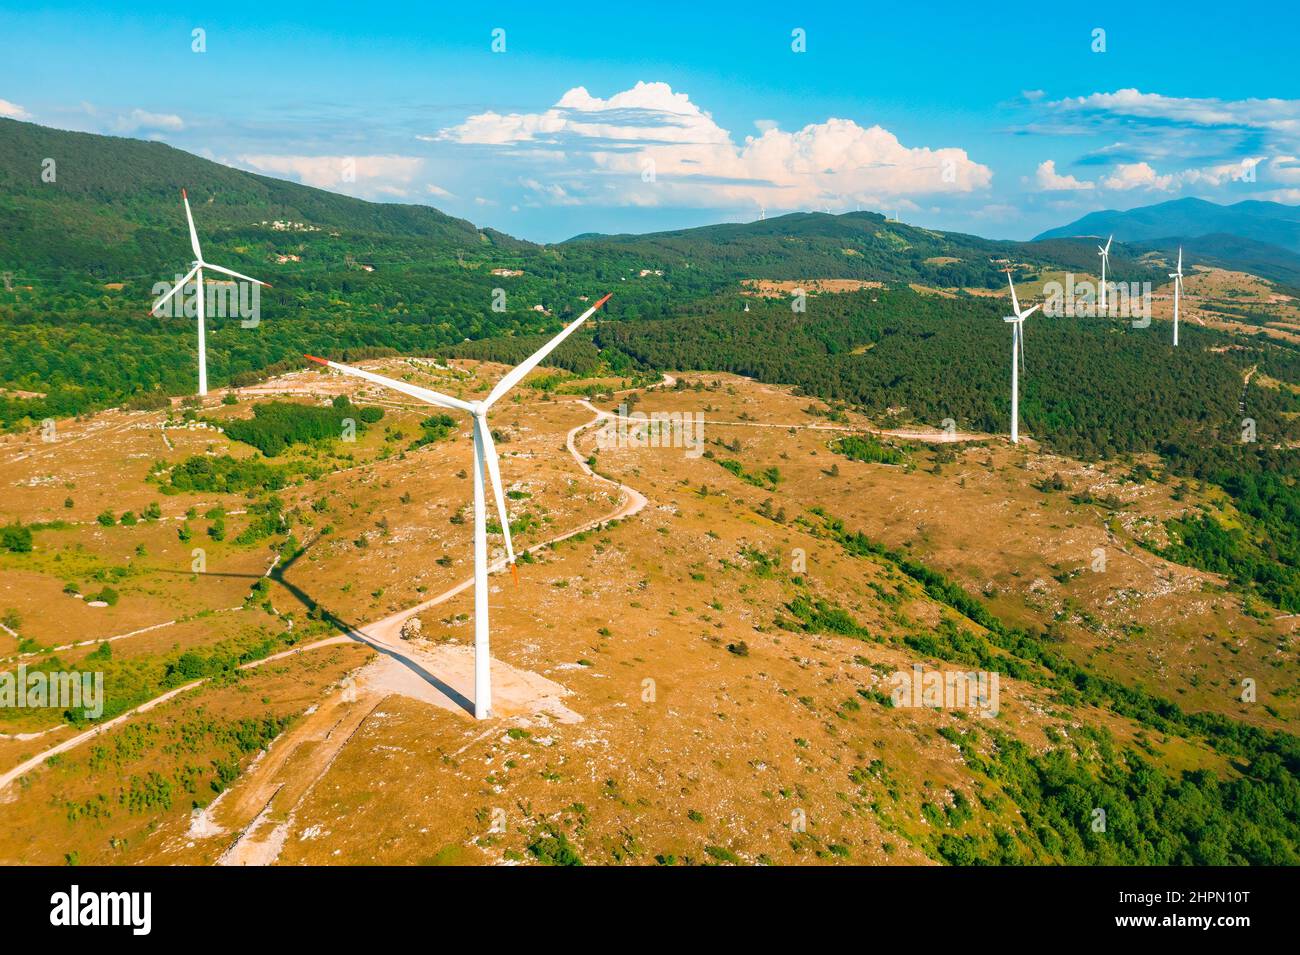 Rotating wind driven generators produce alternative energy scattered in highland against forestry mountains protecting environment aerial view Stock Photo